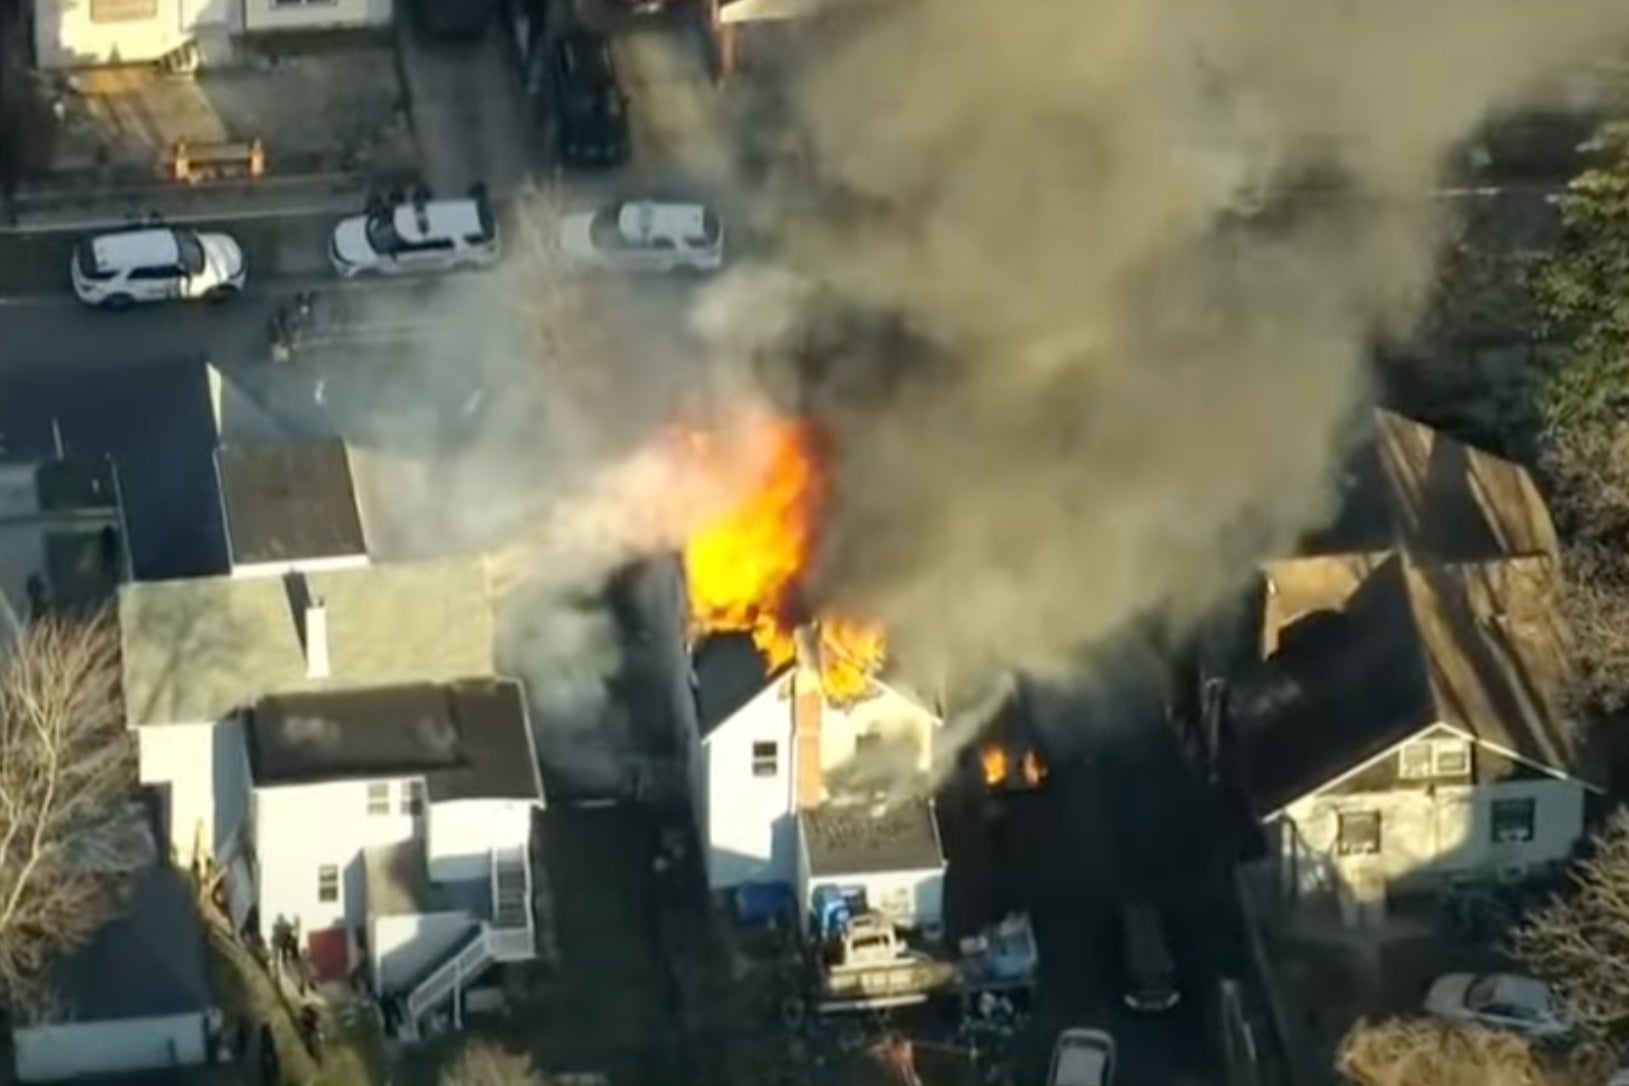 Six people are missing after a home in suburban Philadelphia was set ablaze